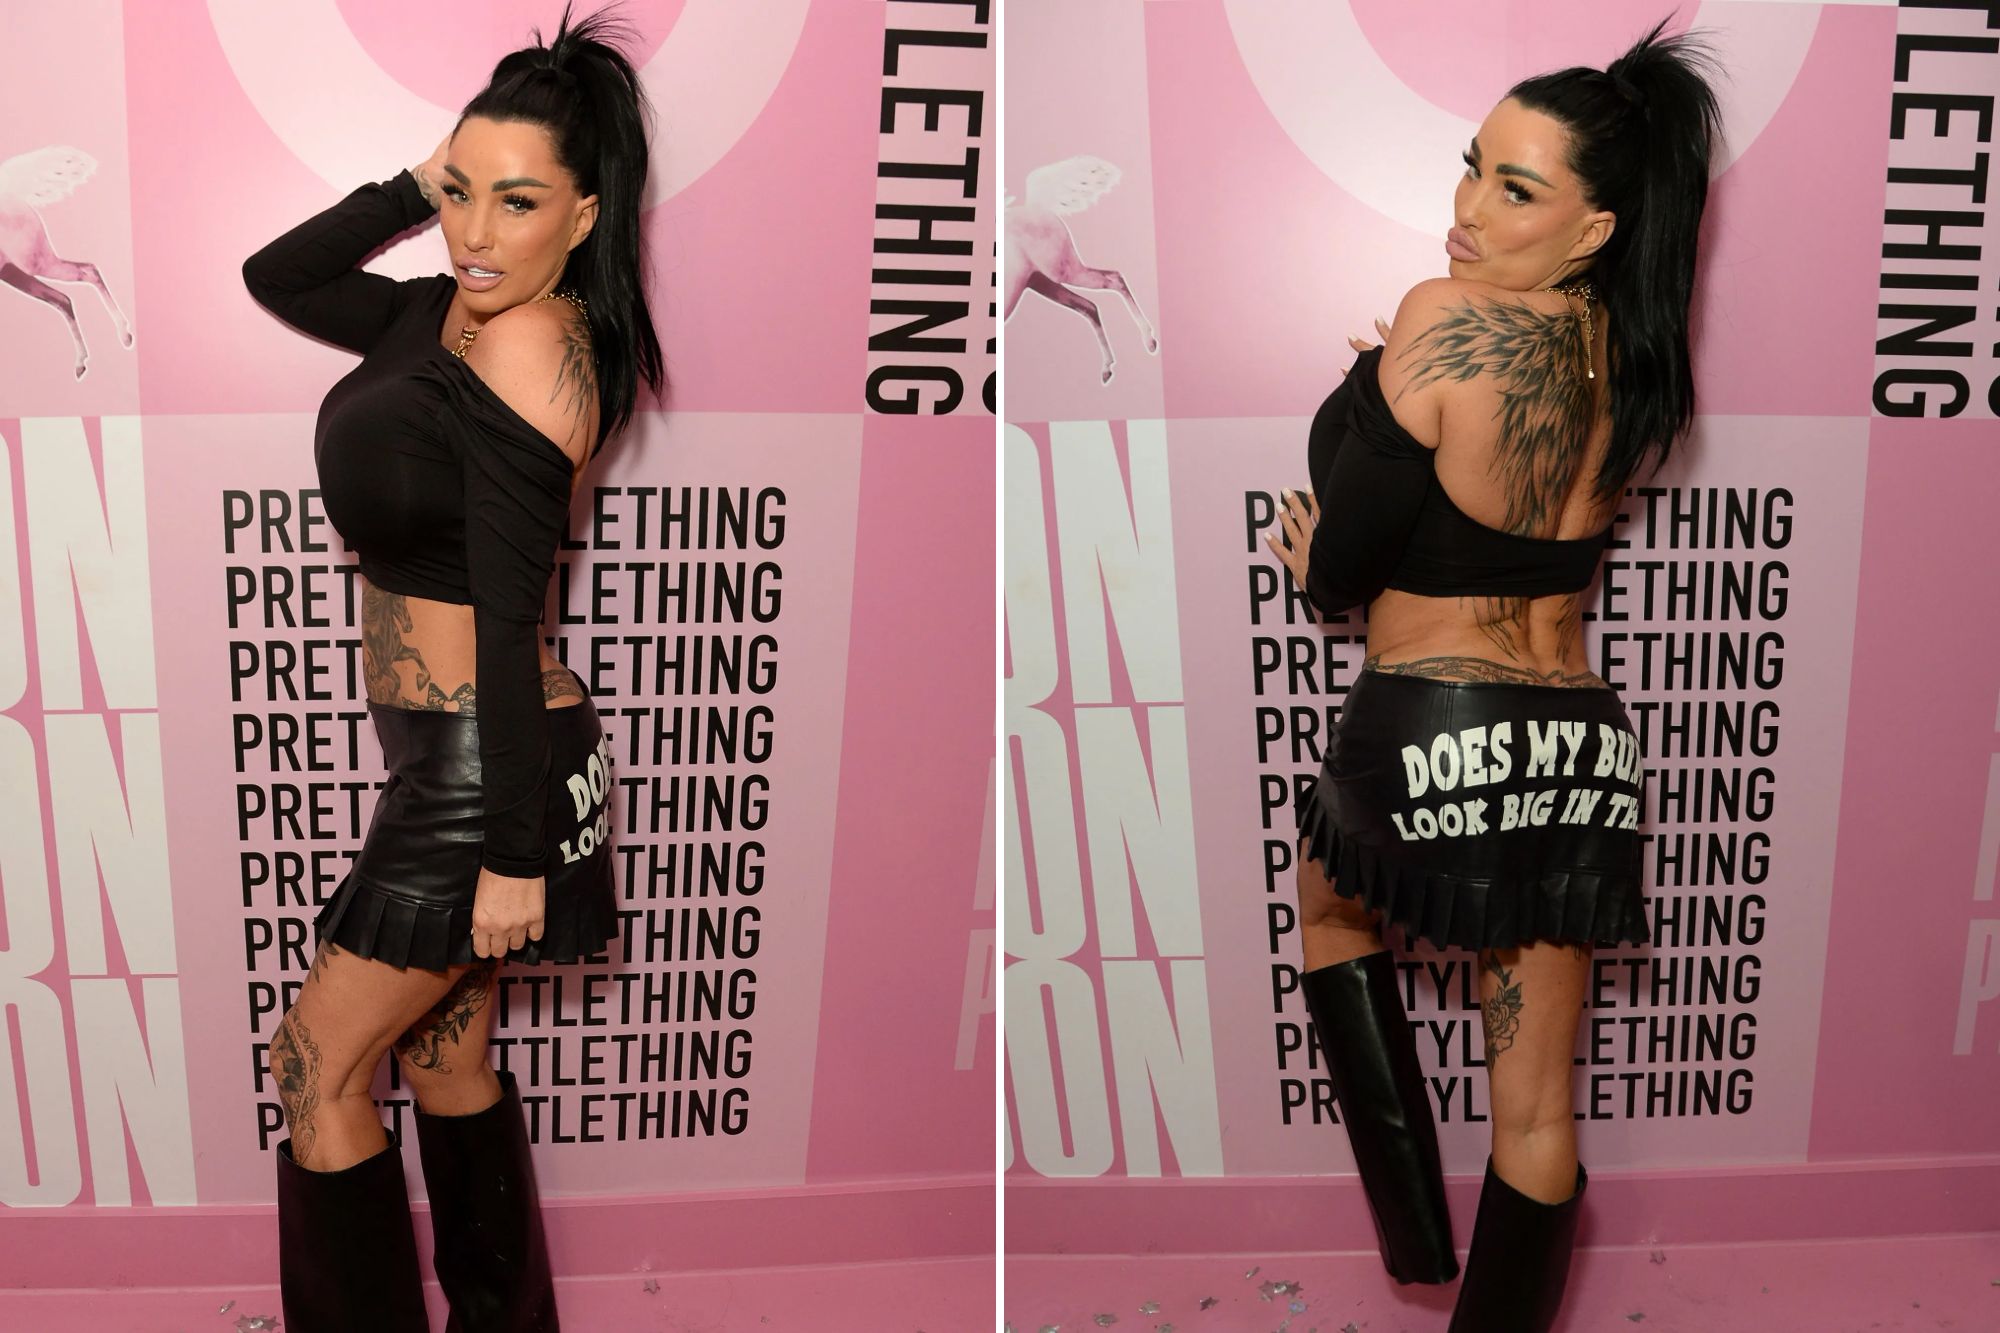 Katie Price shows off huge back tattoo in crop top and mini skirt at PLT party